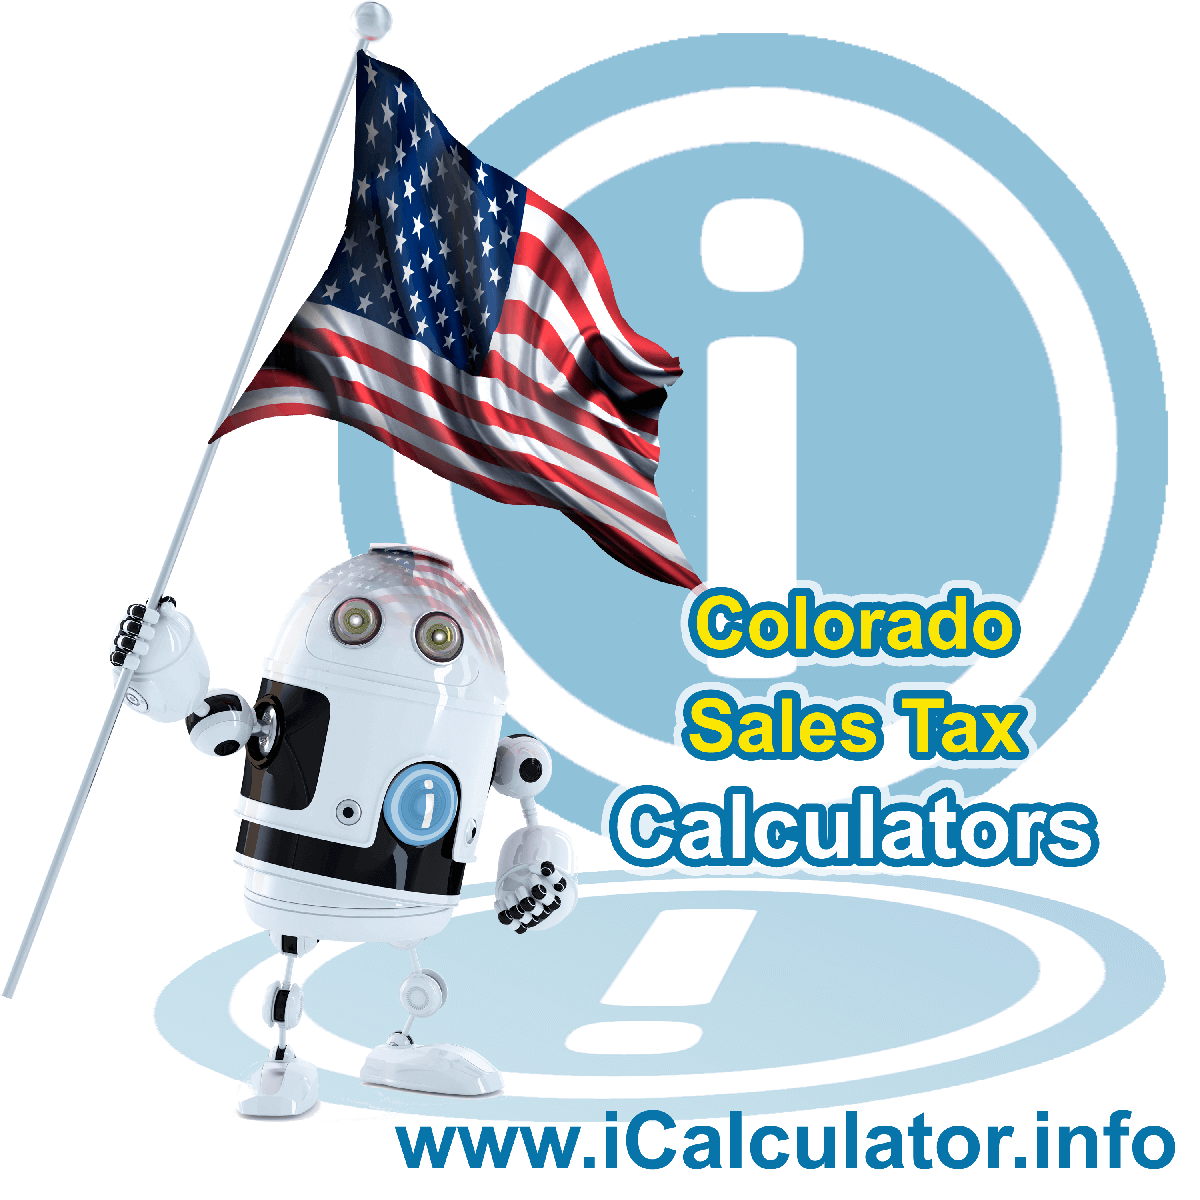 Steamboat Springs Sales Rates: This image illustrates a calculator robot calculating Steamboat Springs sales tax manually using the Steamboat Springs Sales Tax Formula. You can use this information to calculate Steamboat Springs Sales Tax manually or use the Steamboat Springs Sales Tax Calculator to calculate sales tax online.